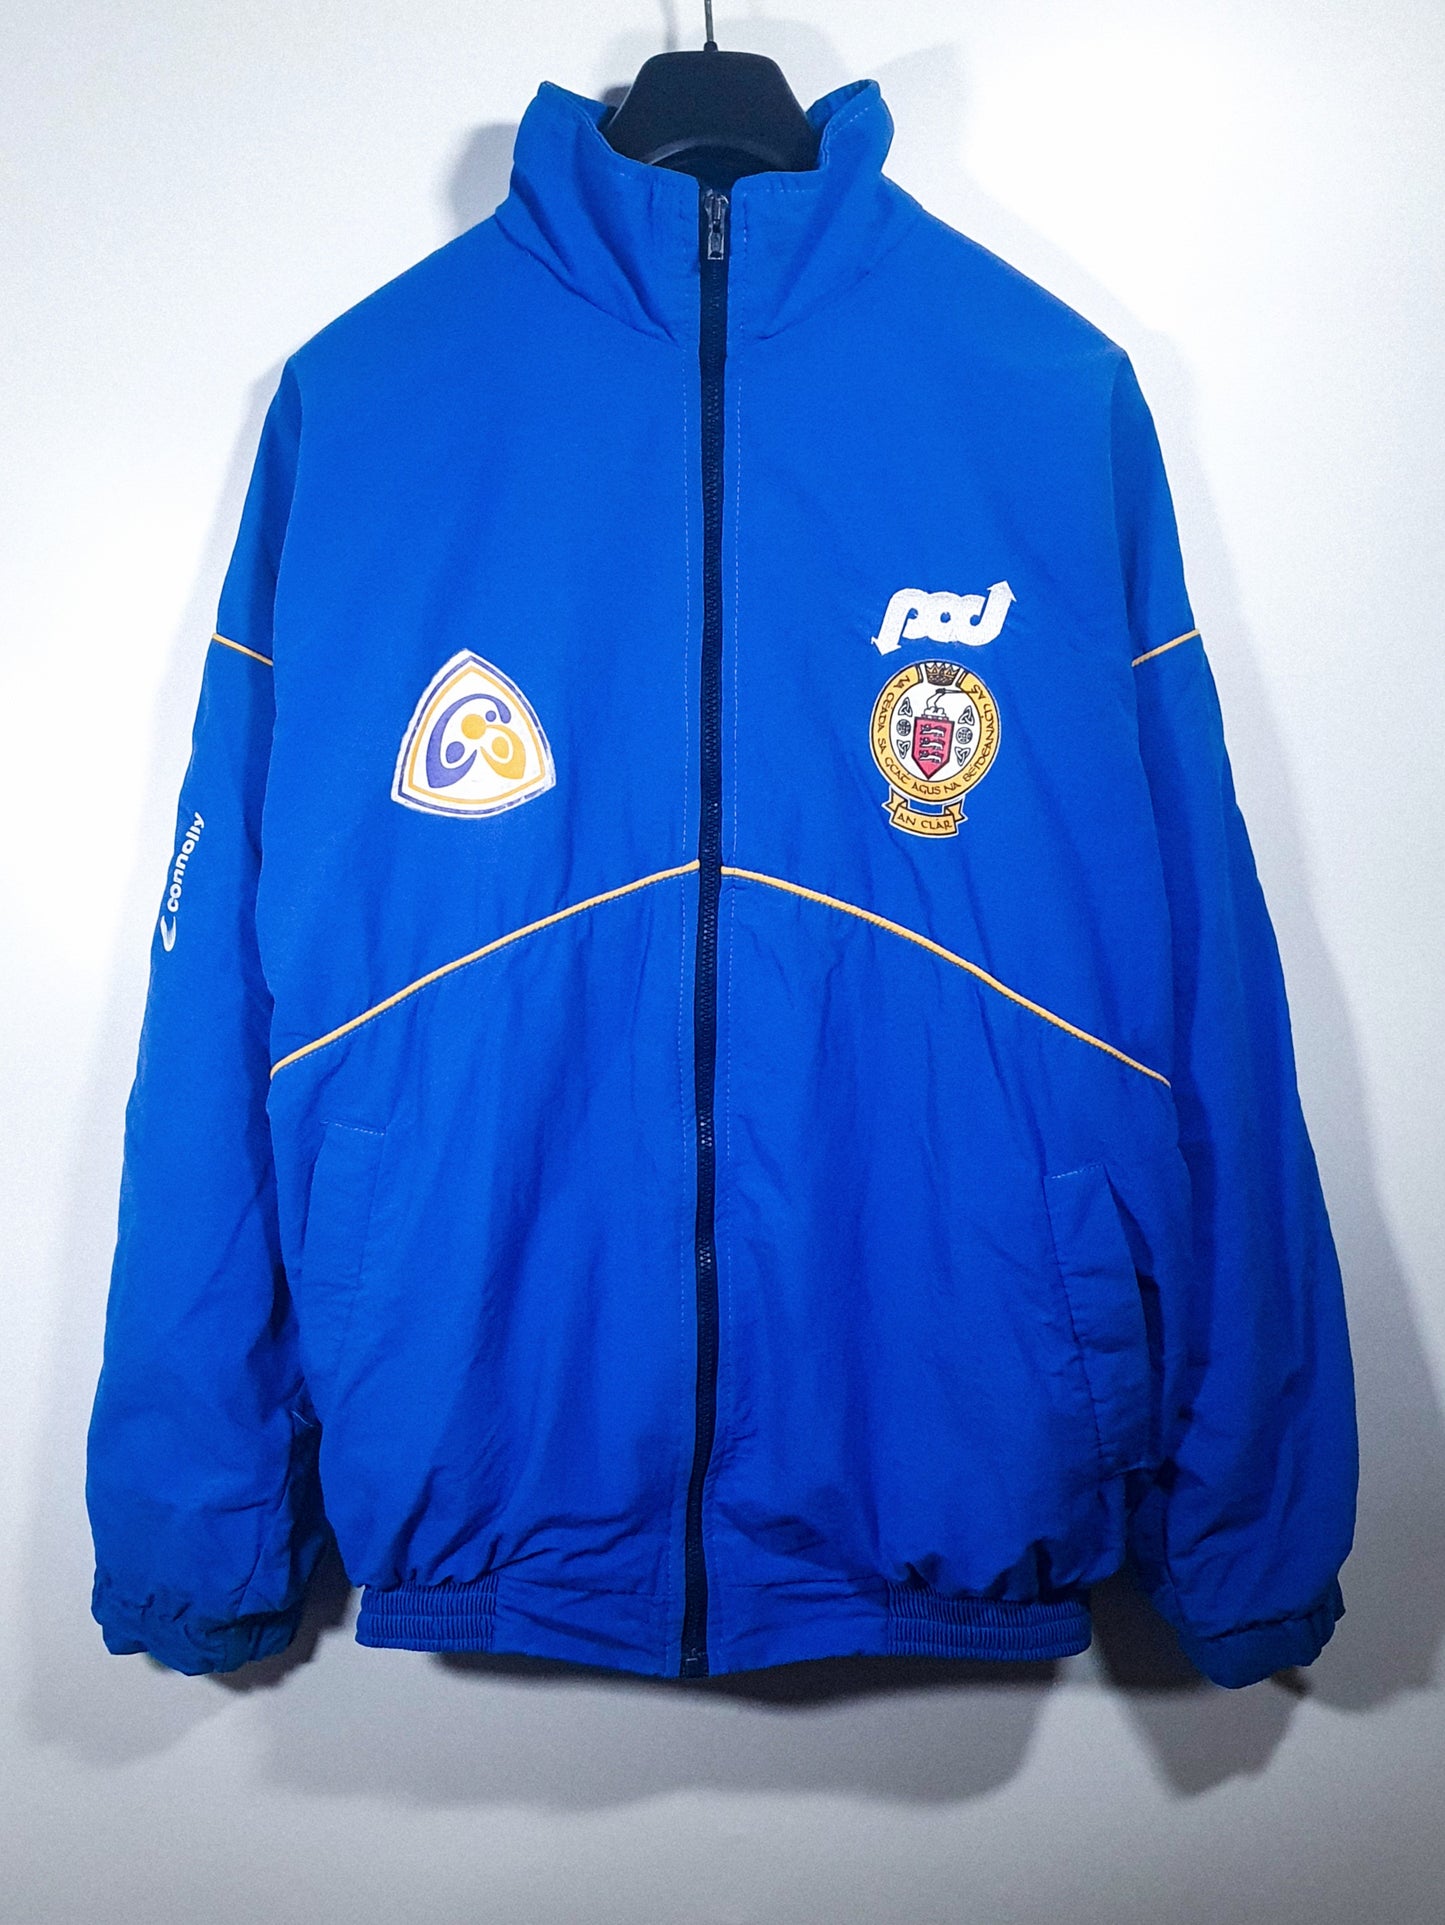 Clare Full Tracksuit 1995 All-Ireland Final (L) - Player Issue - Ollie Baker